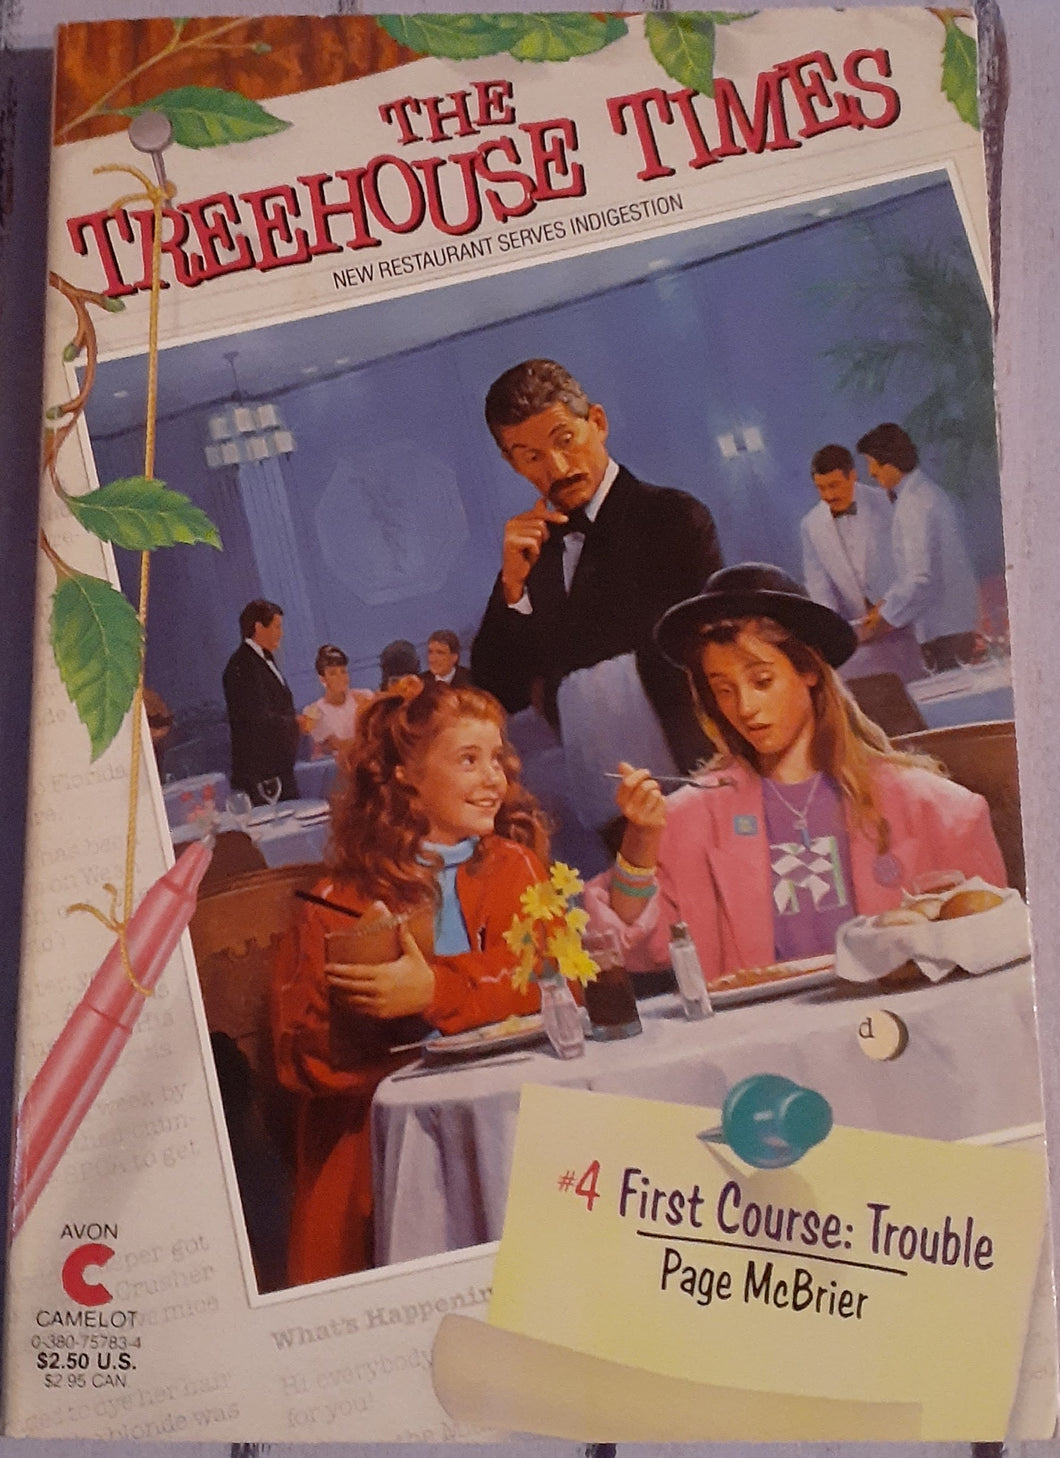 The Treehouse Times - #4 First Course: Trouble